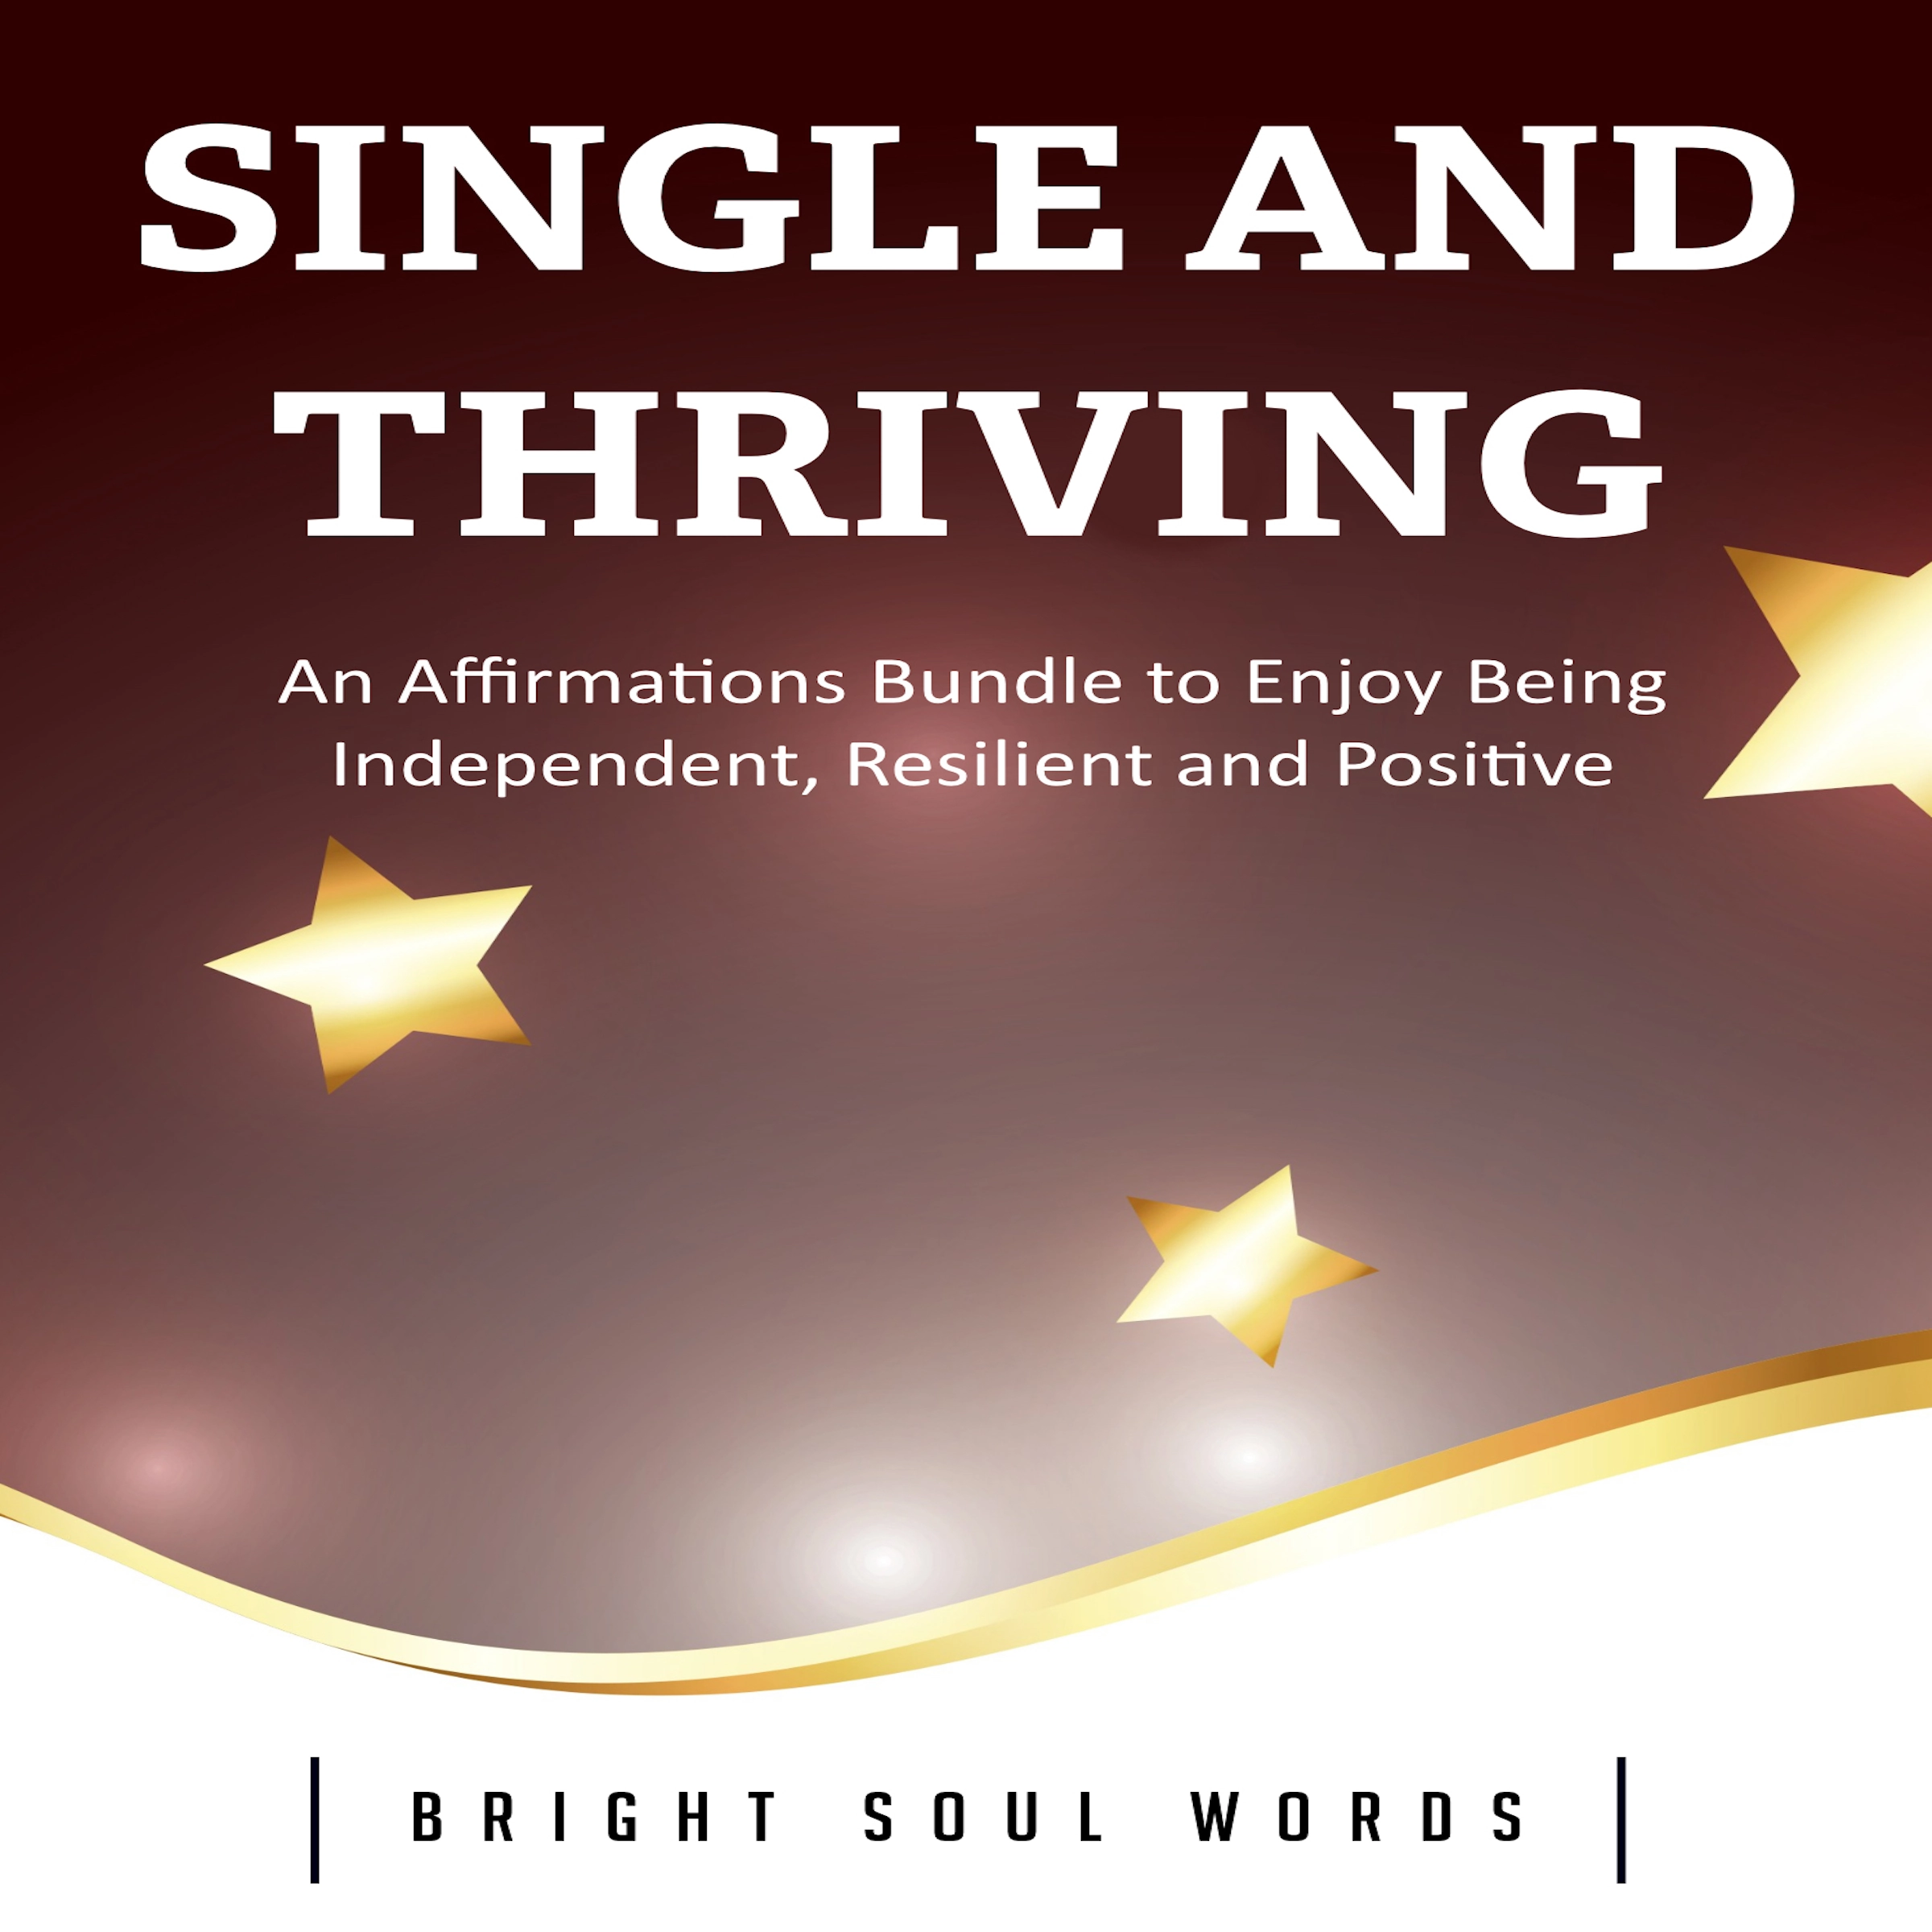 Single and Thriving: An Affirmations Bundle to Enjoy Being Independent, Resilient and Positive Audiobook by Bright Soul Words